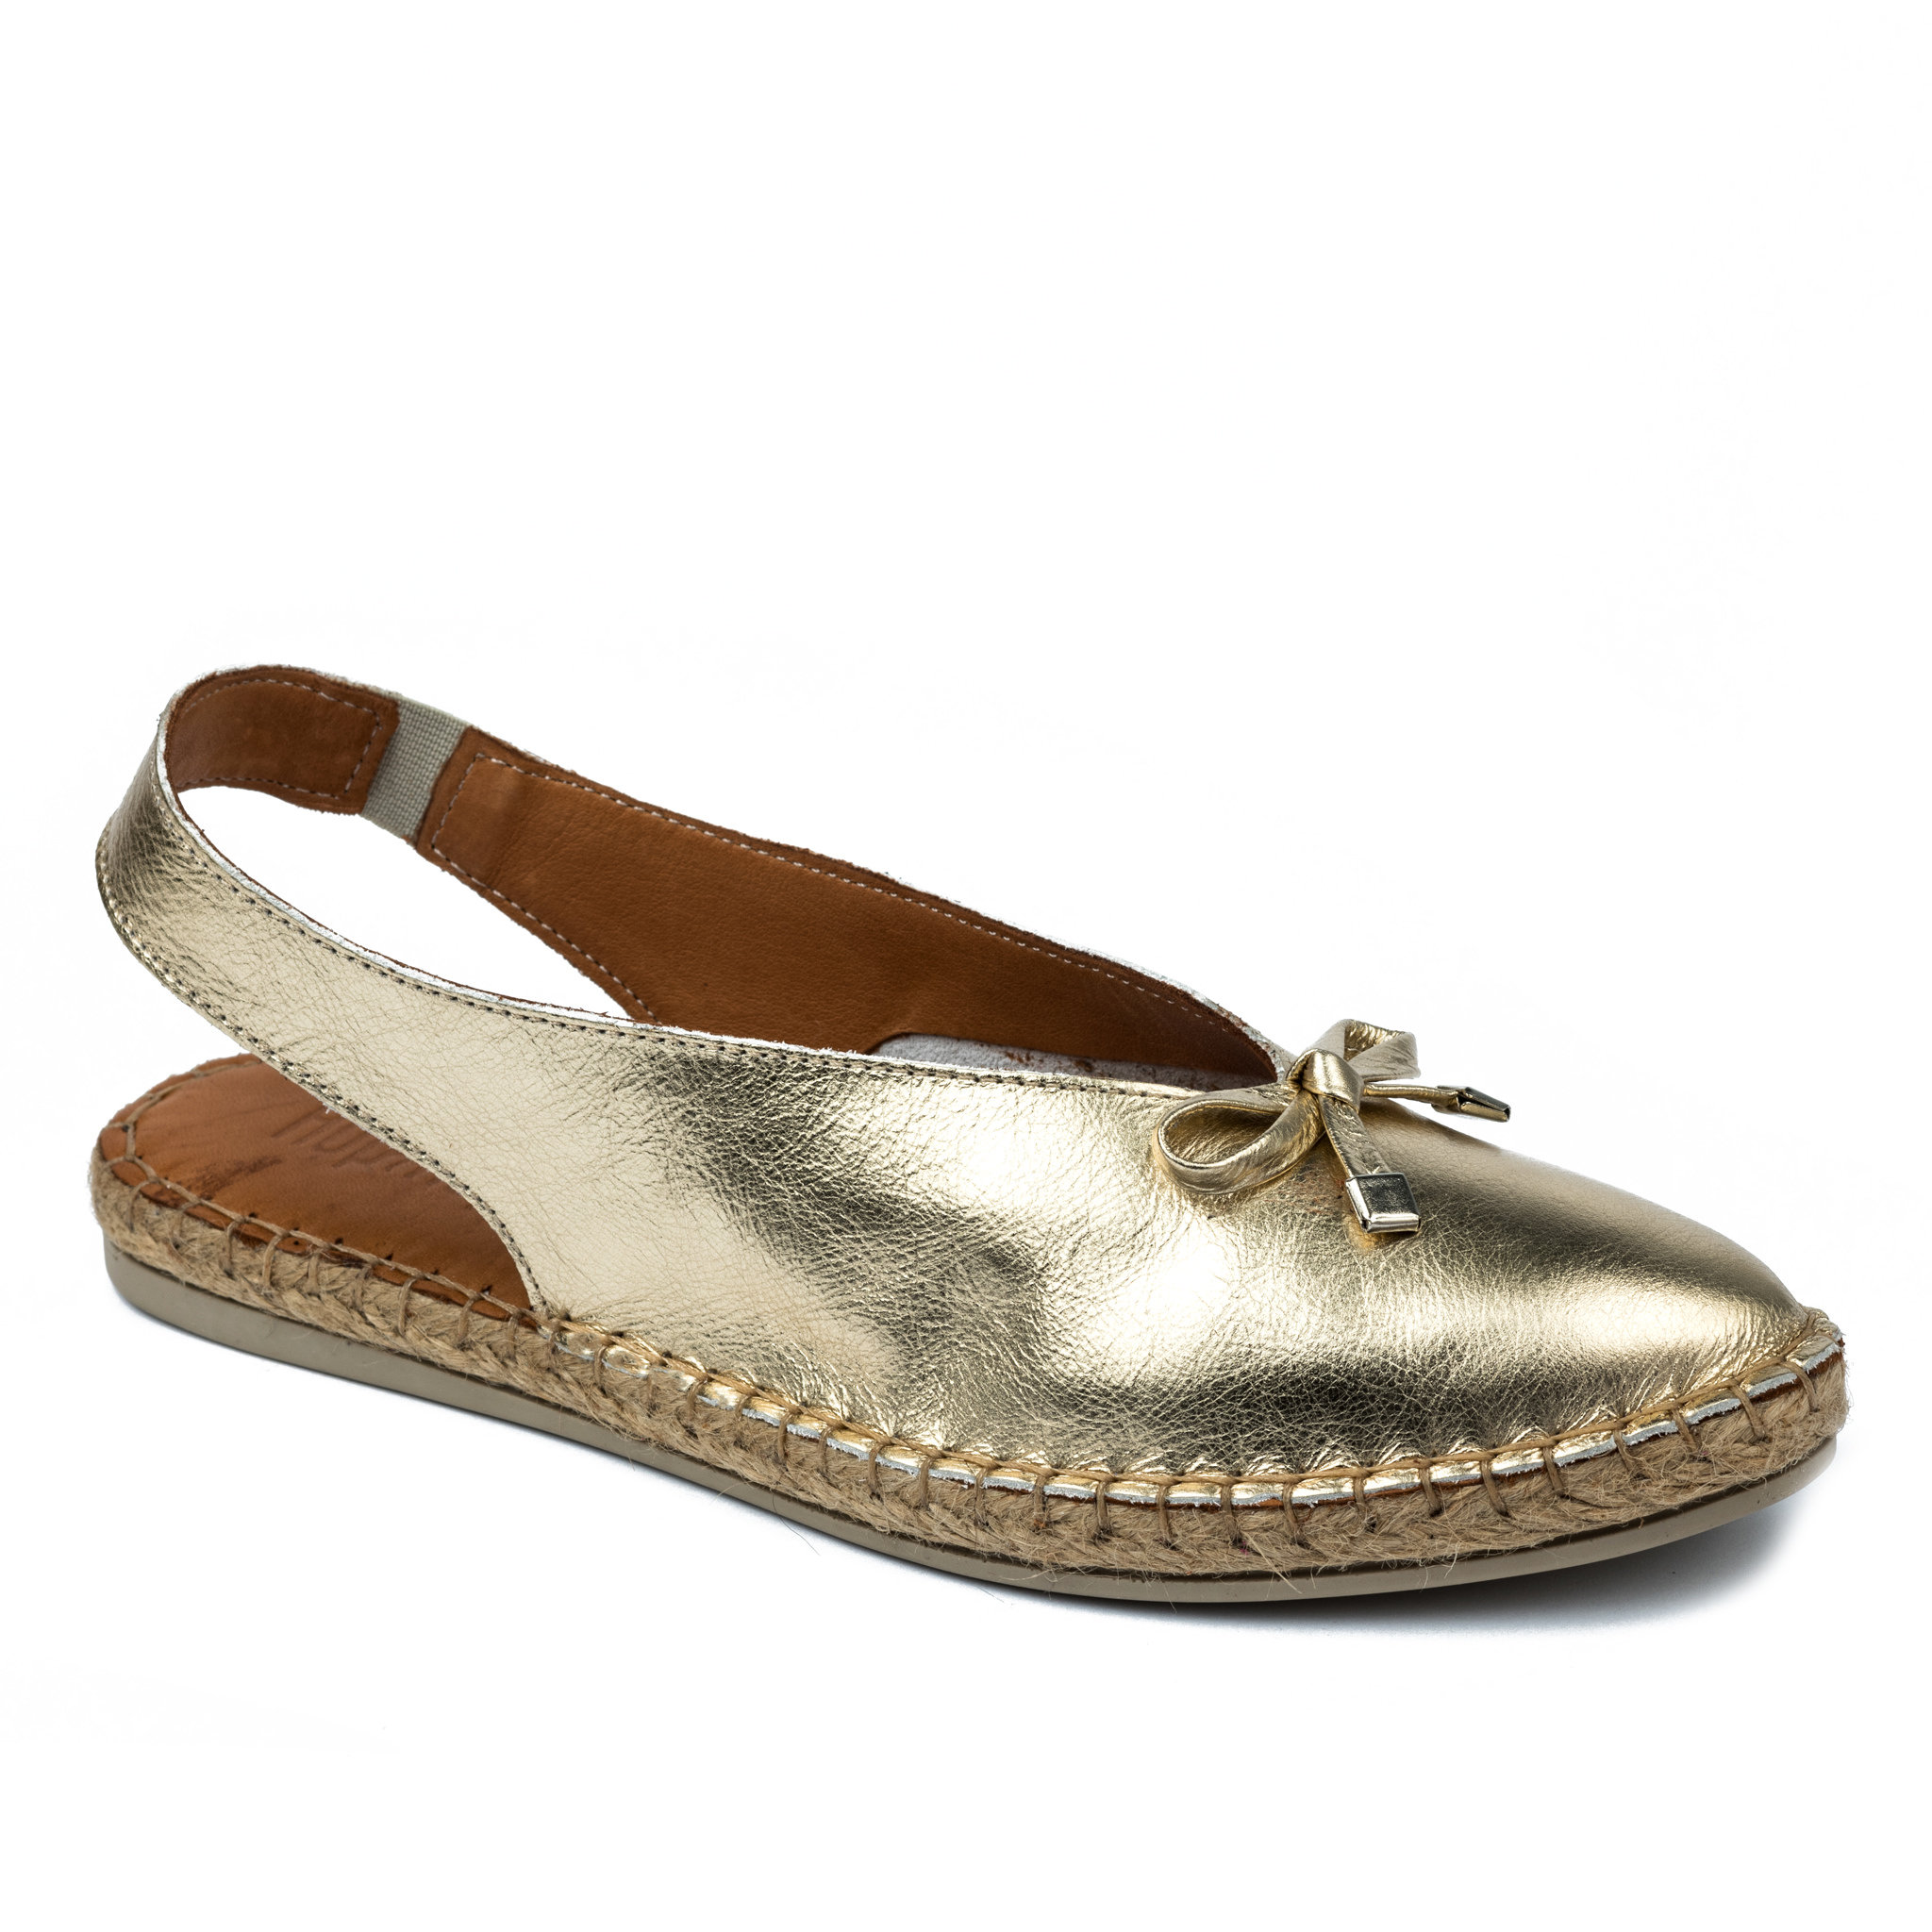 Leather espadrilles A592 - GOLD